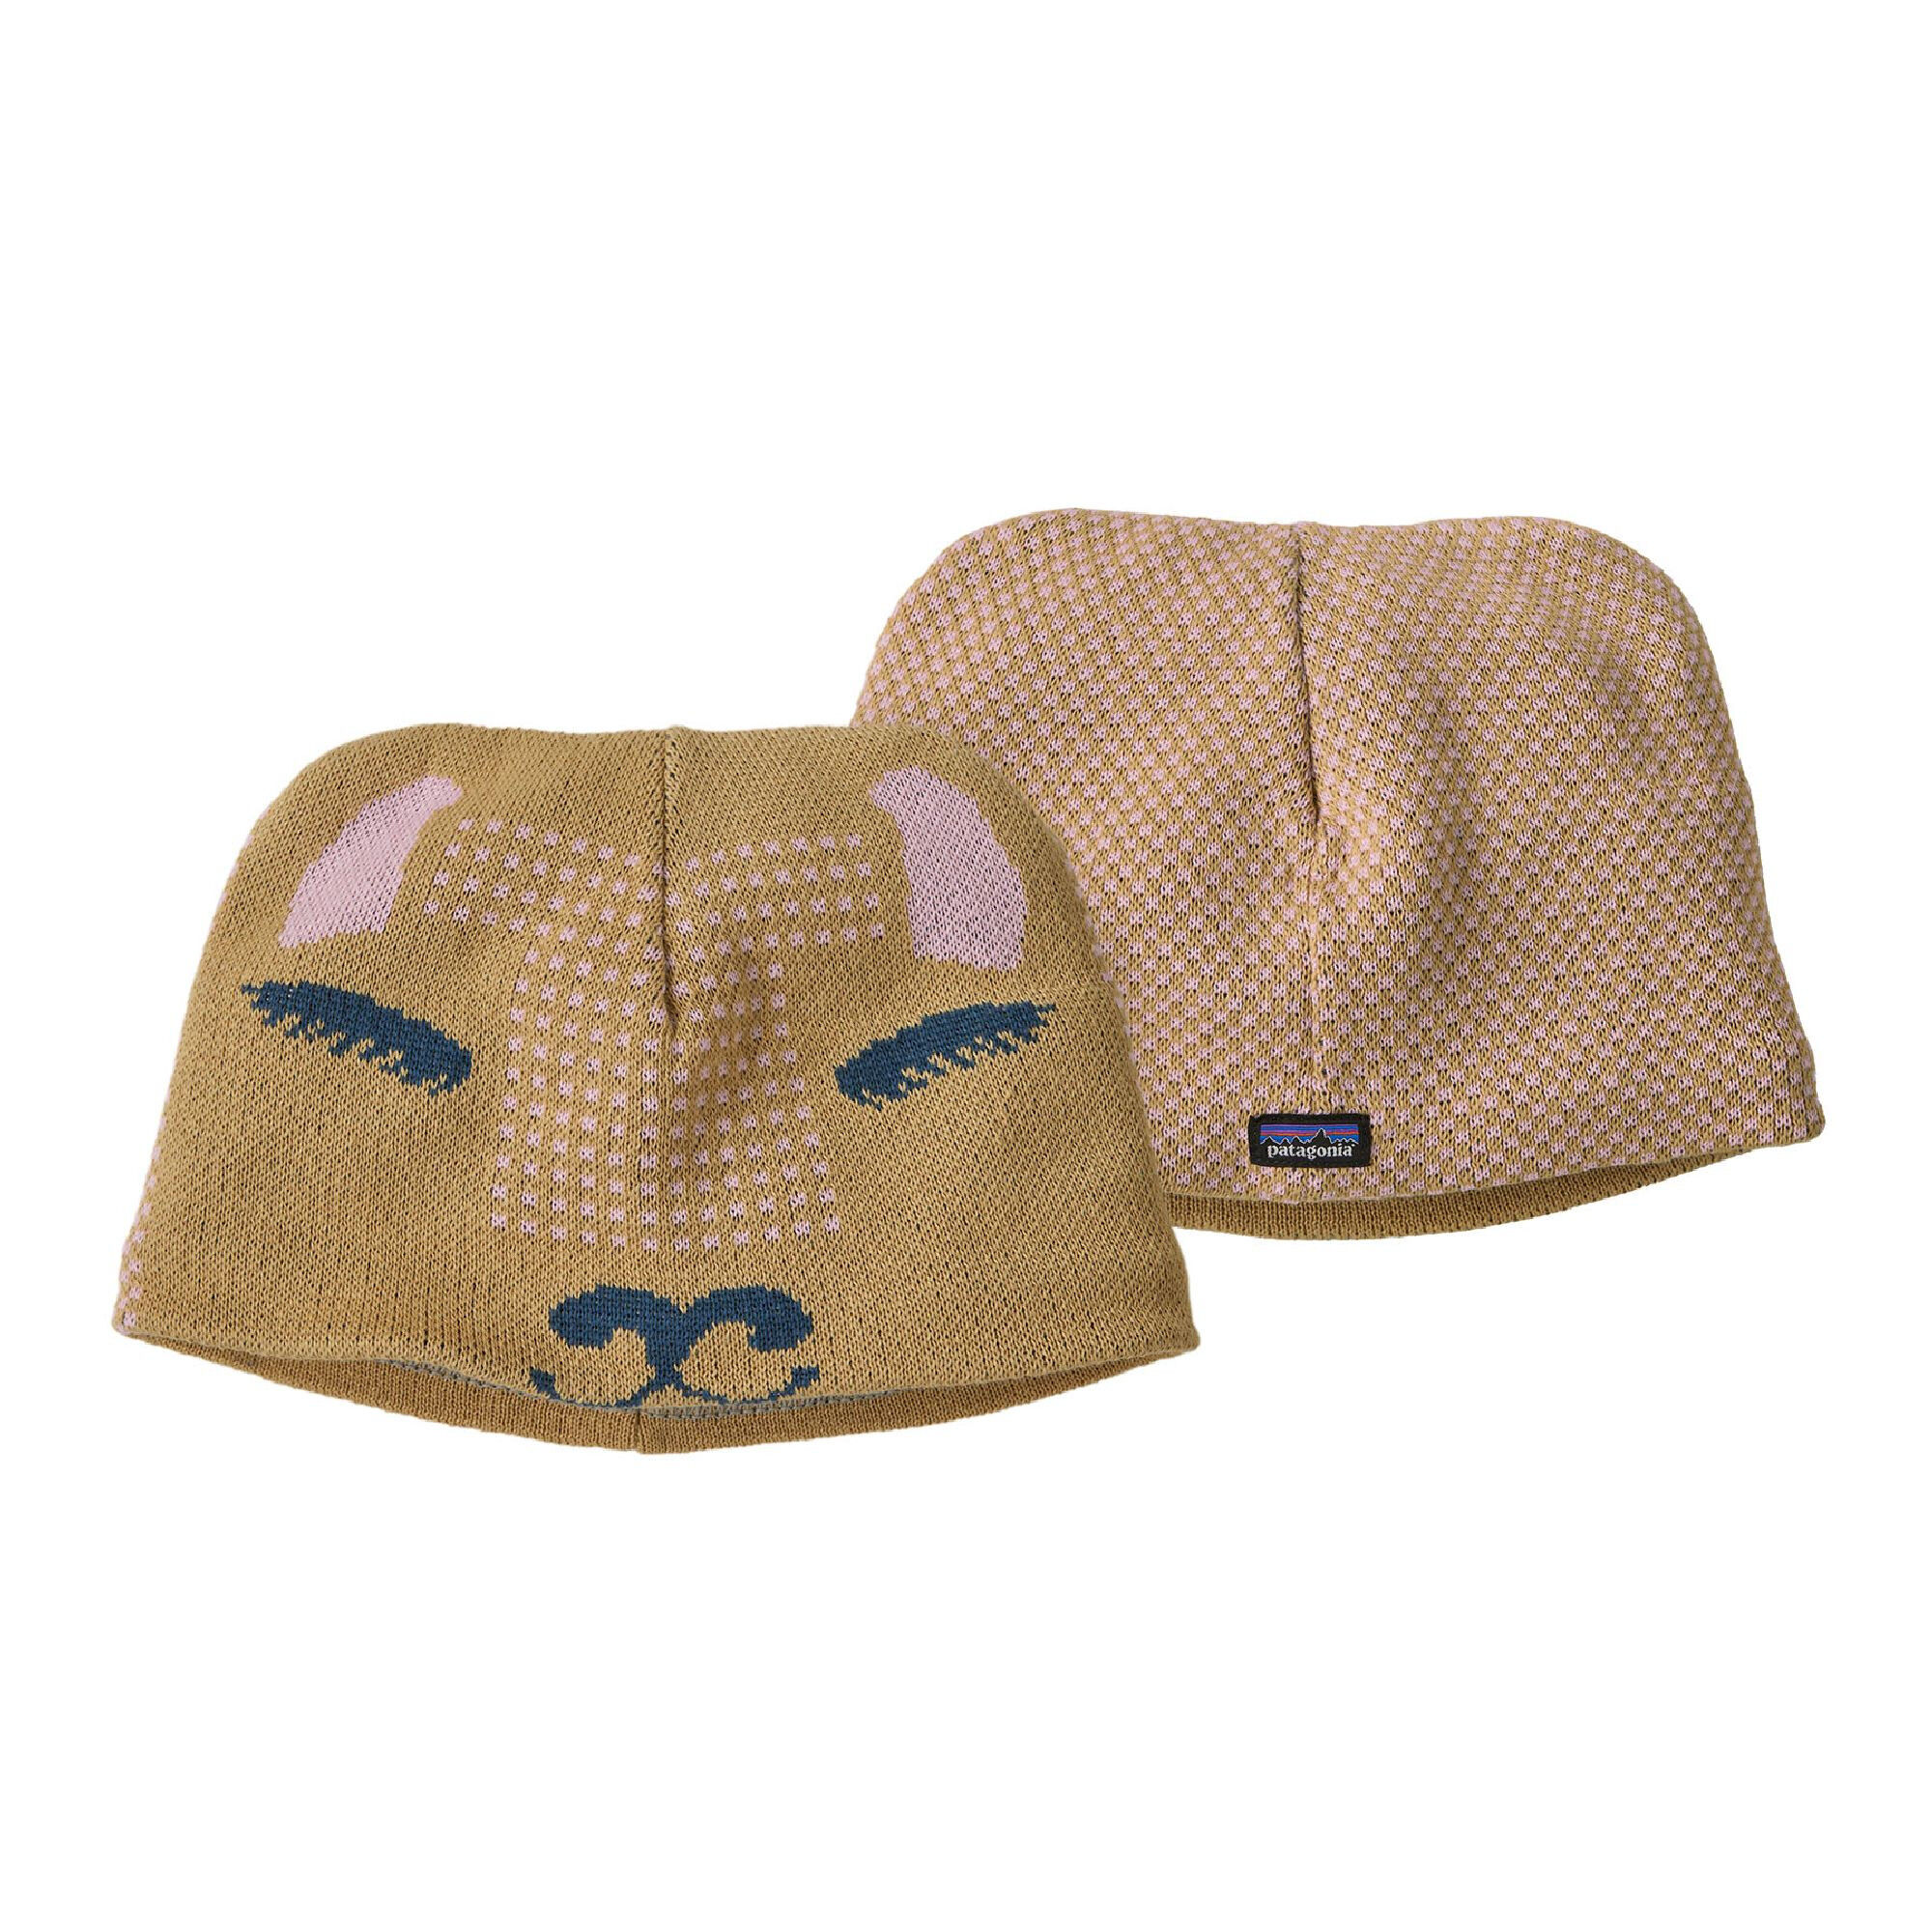 Patagonia Baby Animal Friends Beanie - Pipo